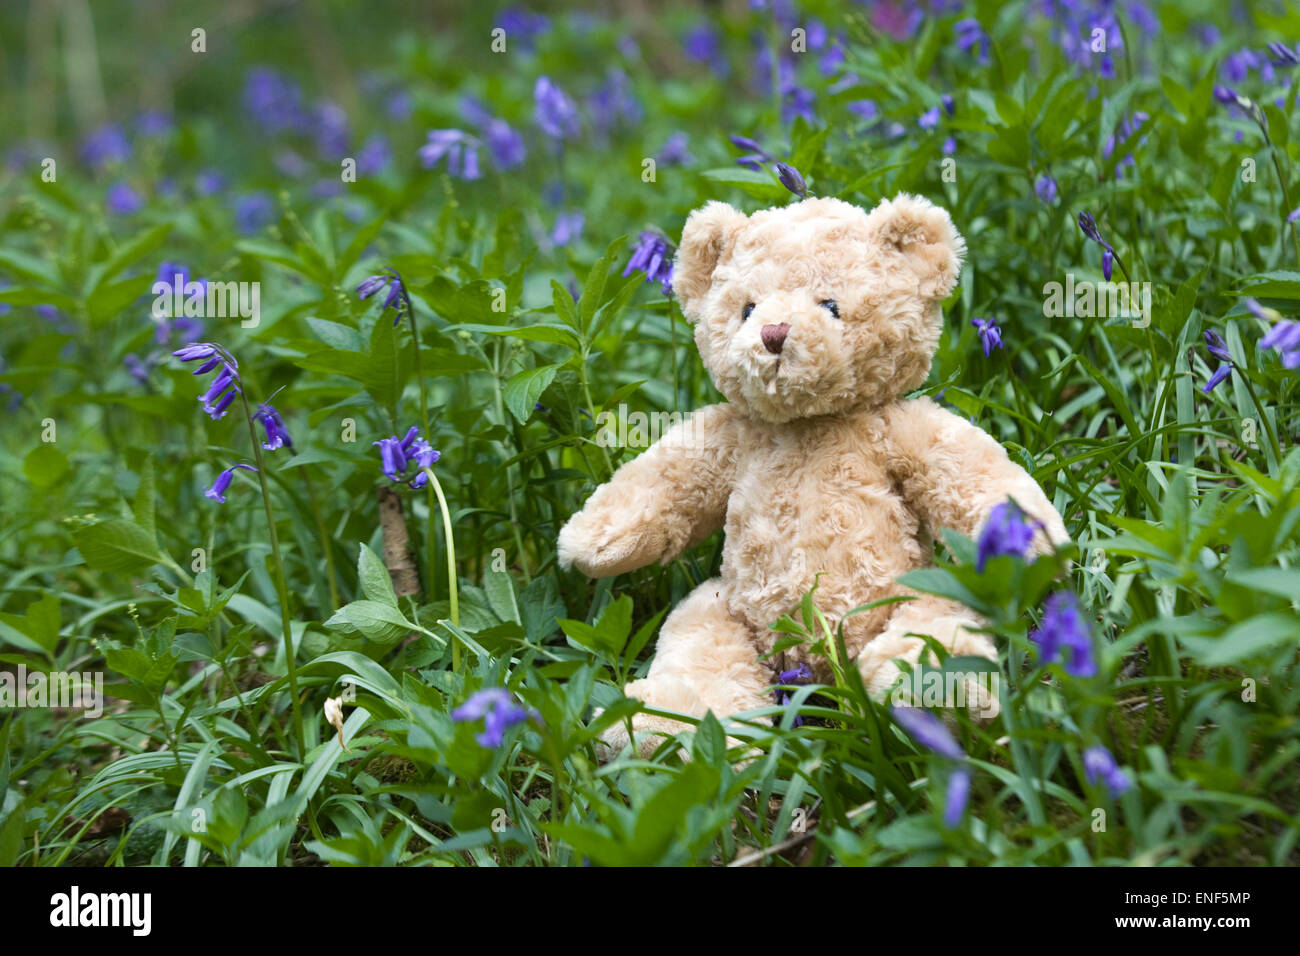 https://c8.alamy.com/comp/ENF5MP/teddy-bear-sitting-on-a-a-log-surrounded-by-bluebells-ENF5MP.jpg